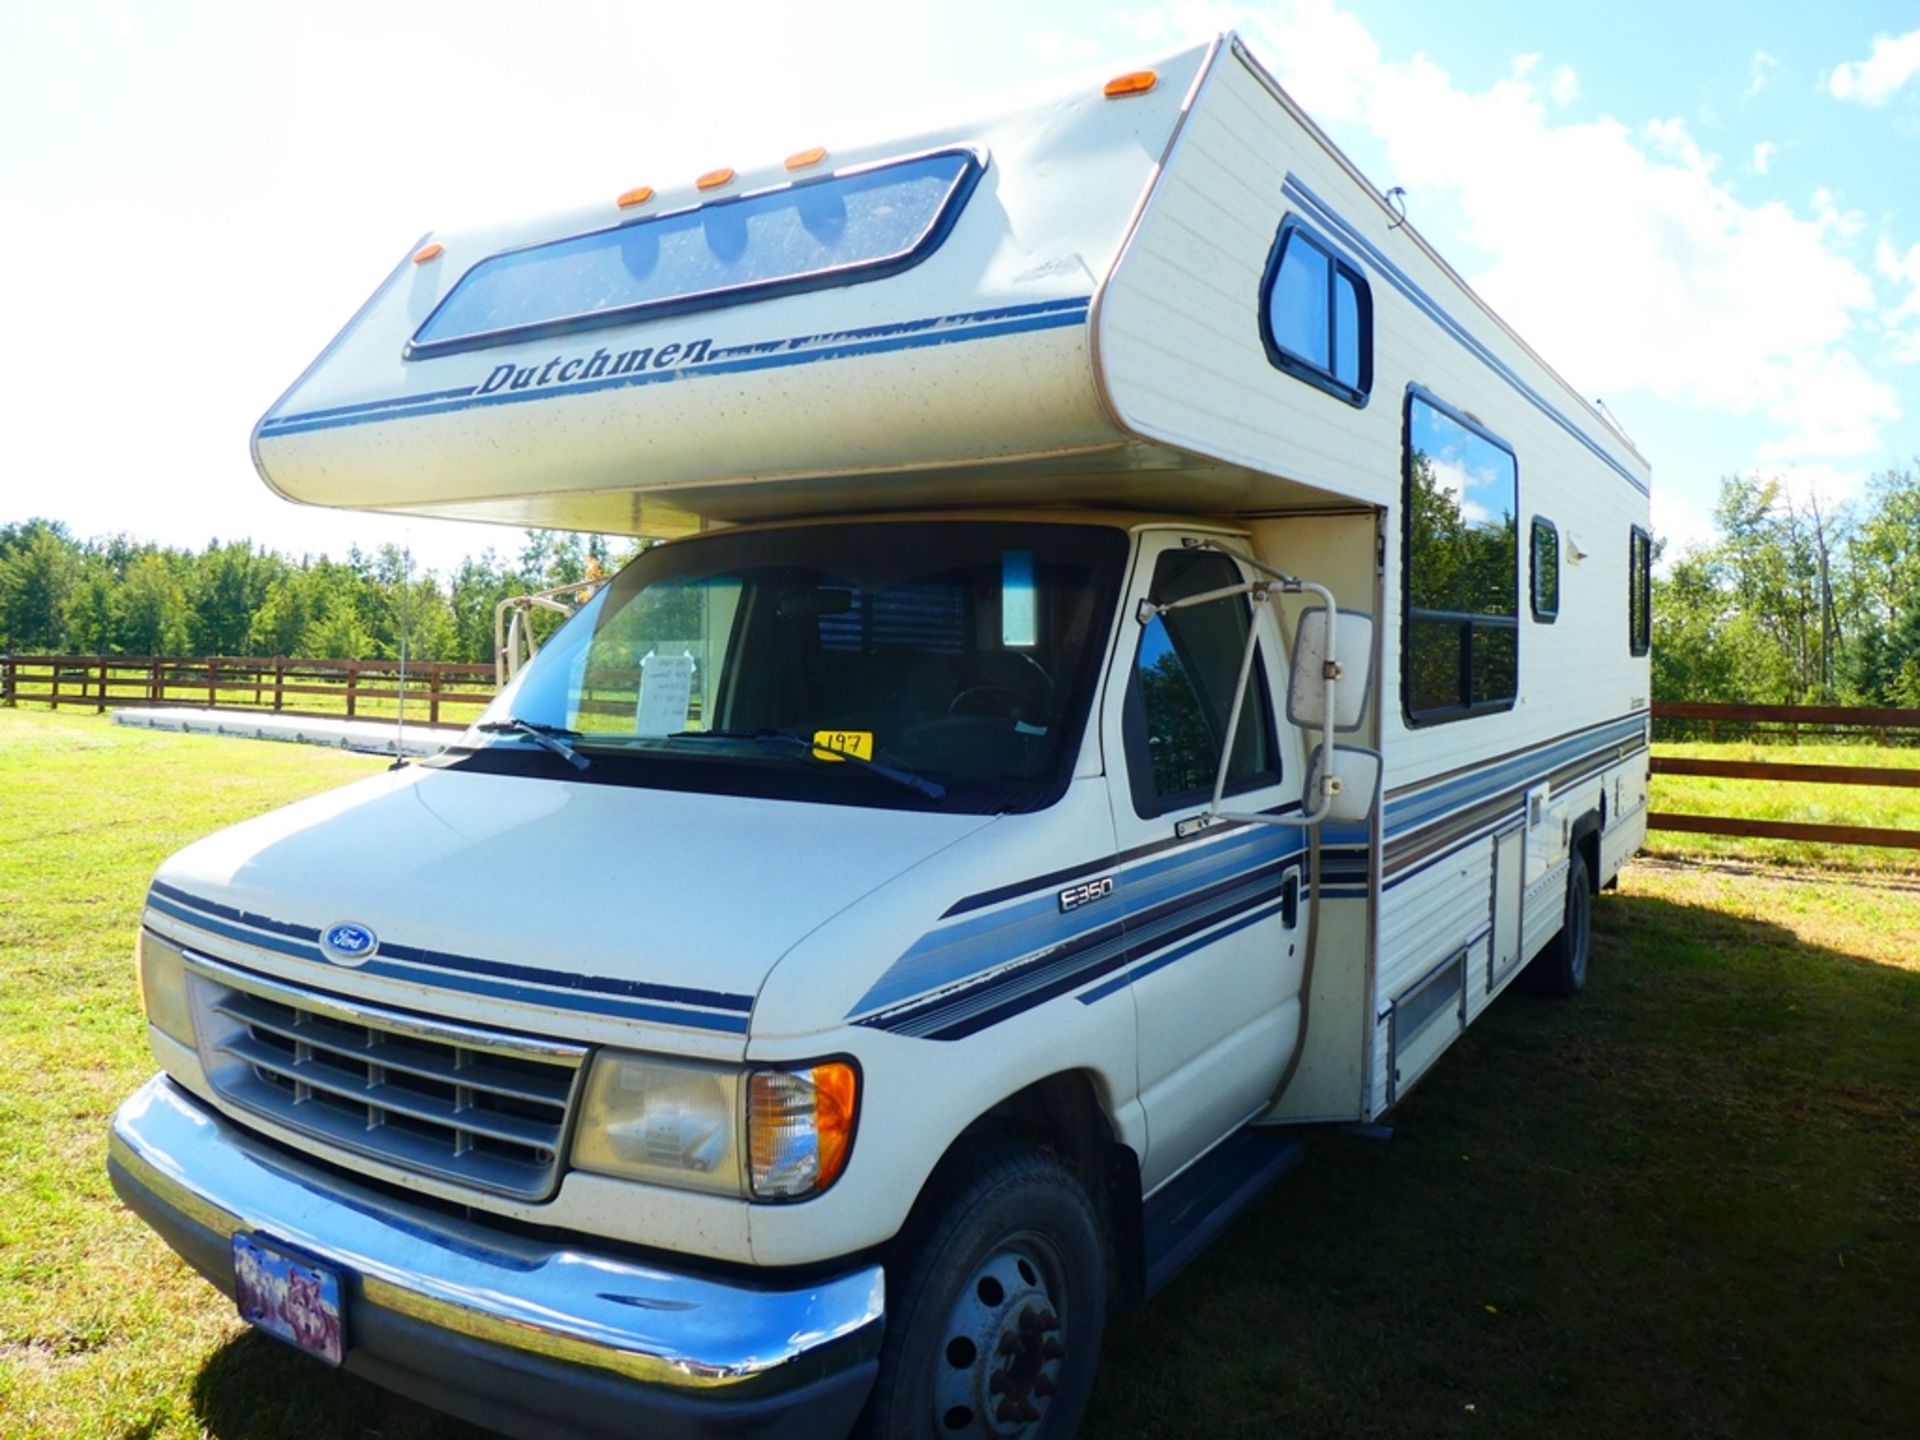 1992 FORD 27' CLASS C MOTOR HOME - SLEEPS 6 W/ BUILT IN GENERATOR, 460 GAS ENGINE, A/C - Image 2 of 9